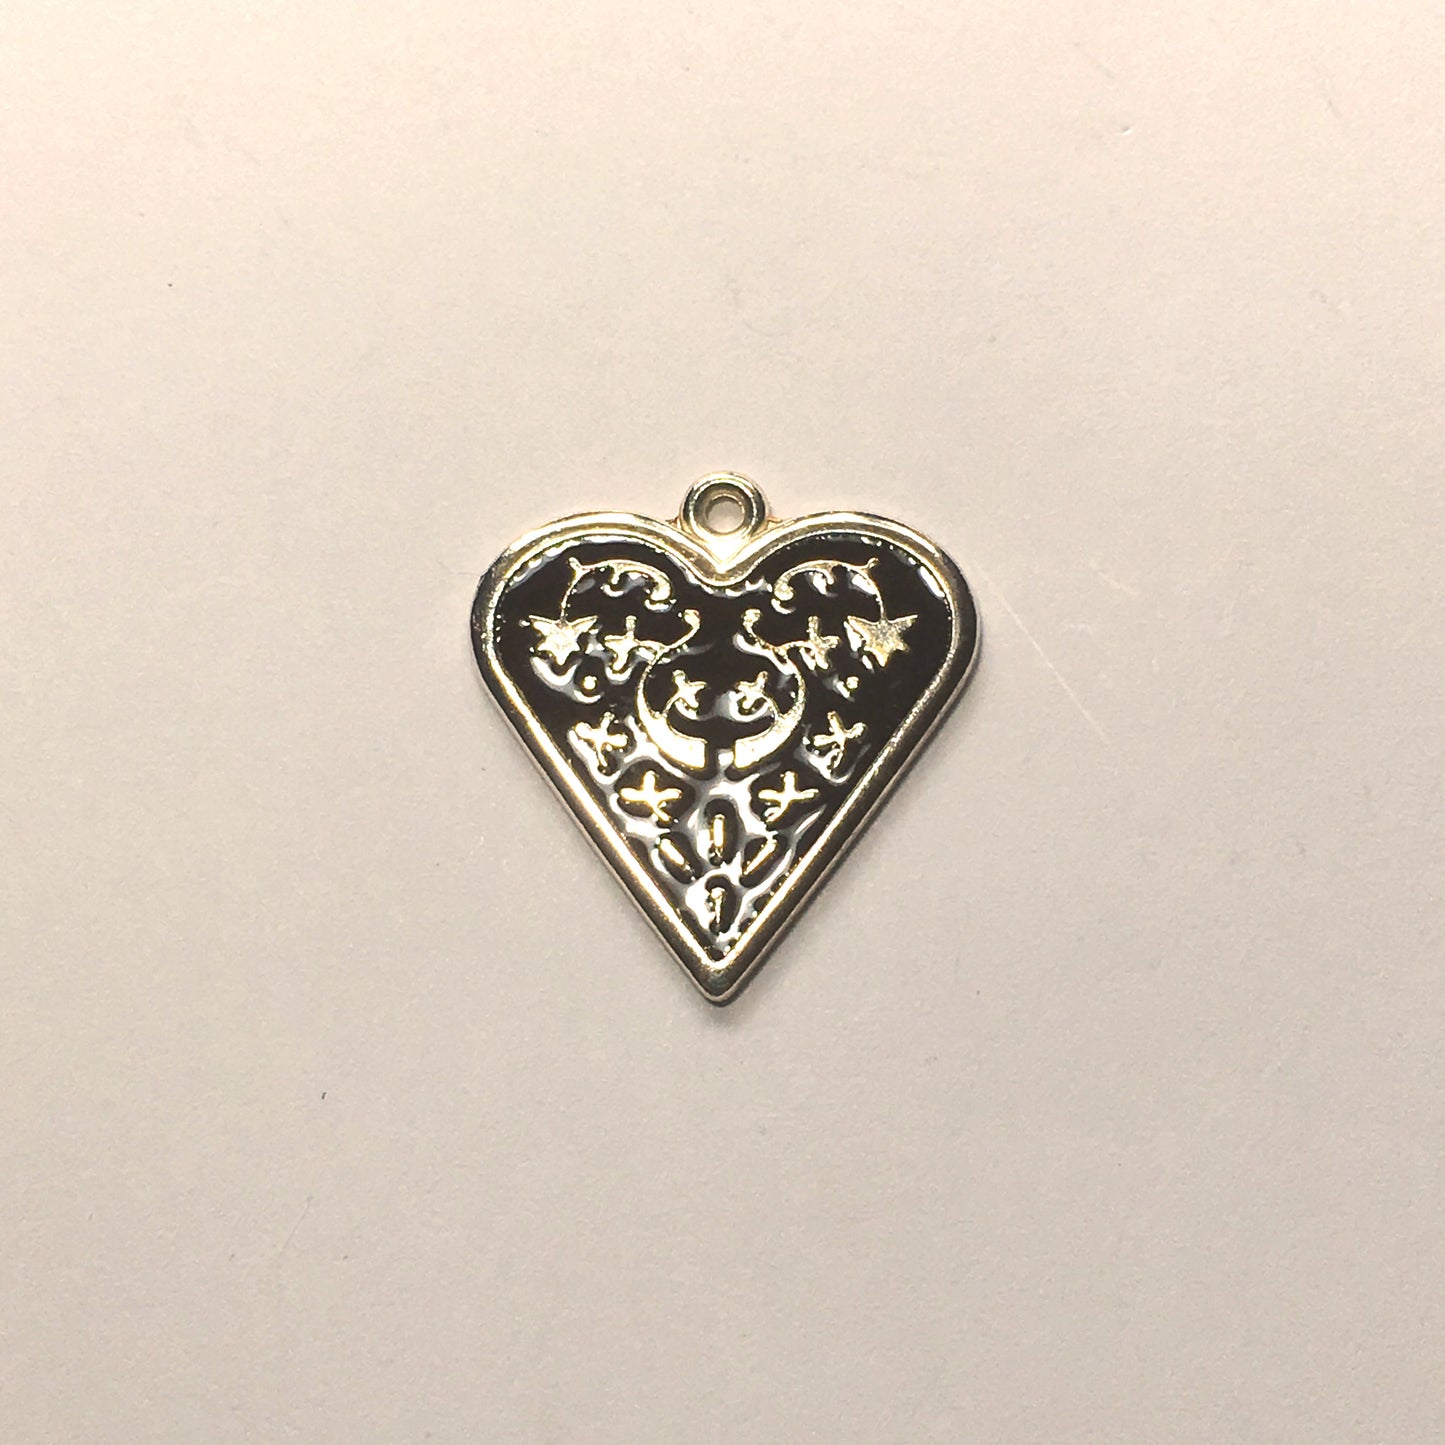 Bright Silver Plated Heart Charm/Pendant with Black Enamel Inlay Flower Design, 25 x 25 mm